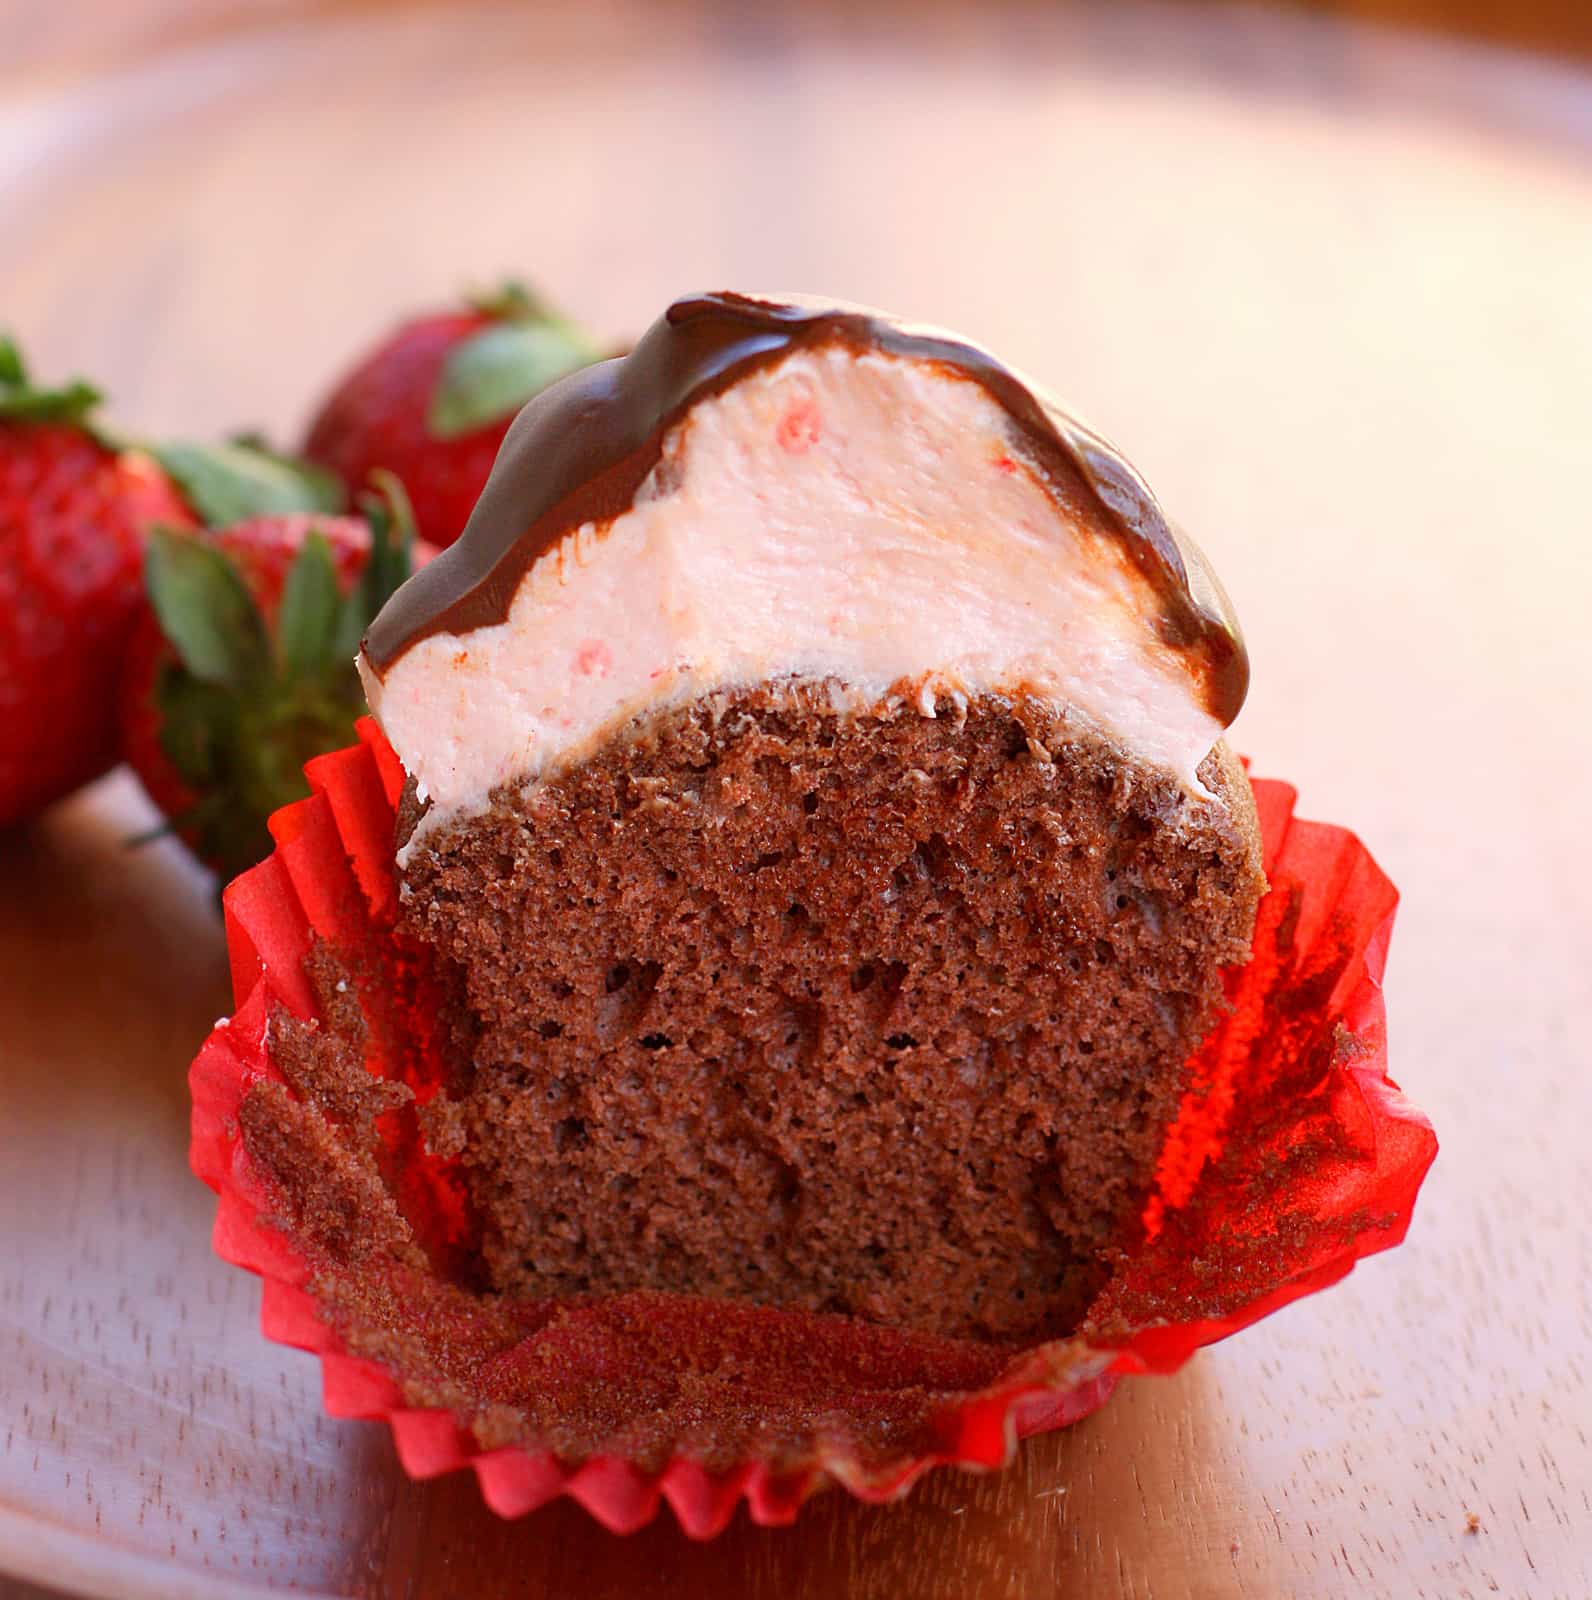 chocolate cupcake cut in half to show thick strawberry frosting on top.